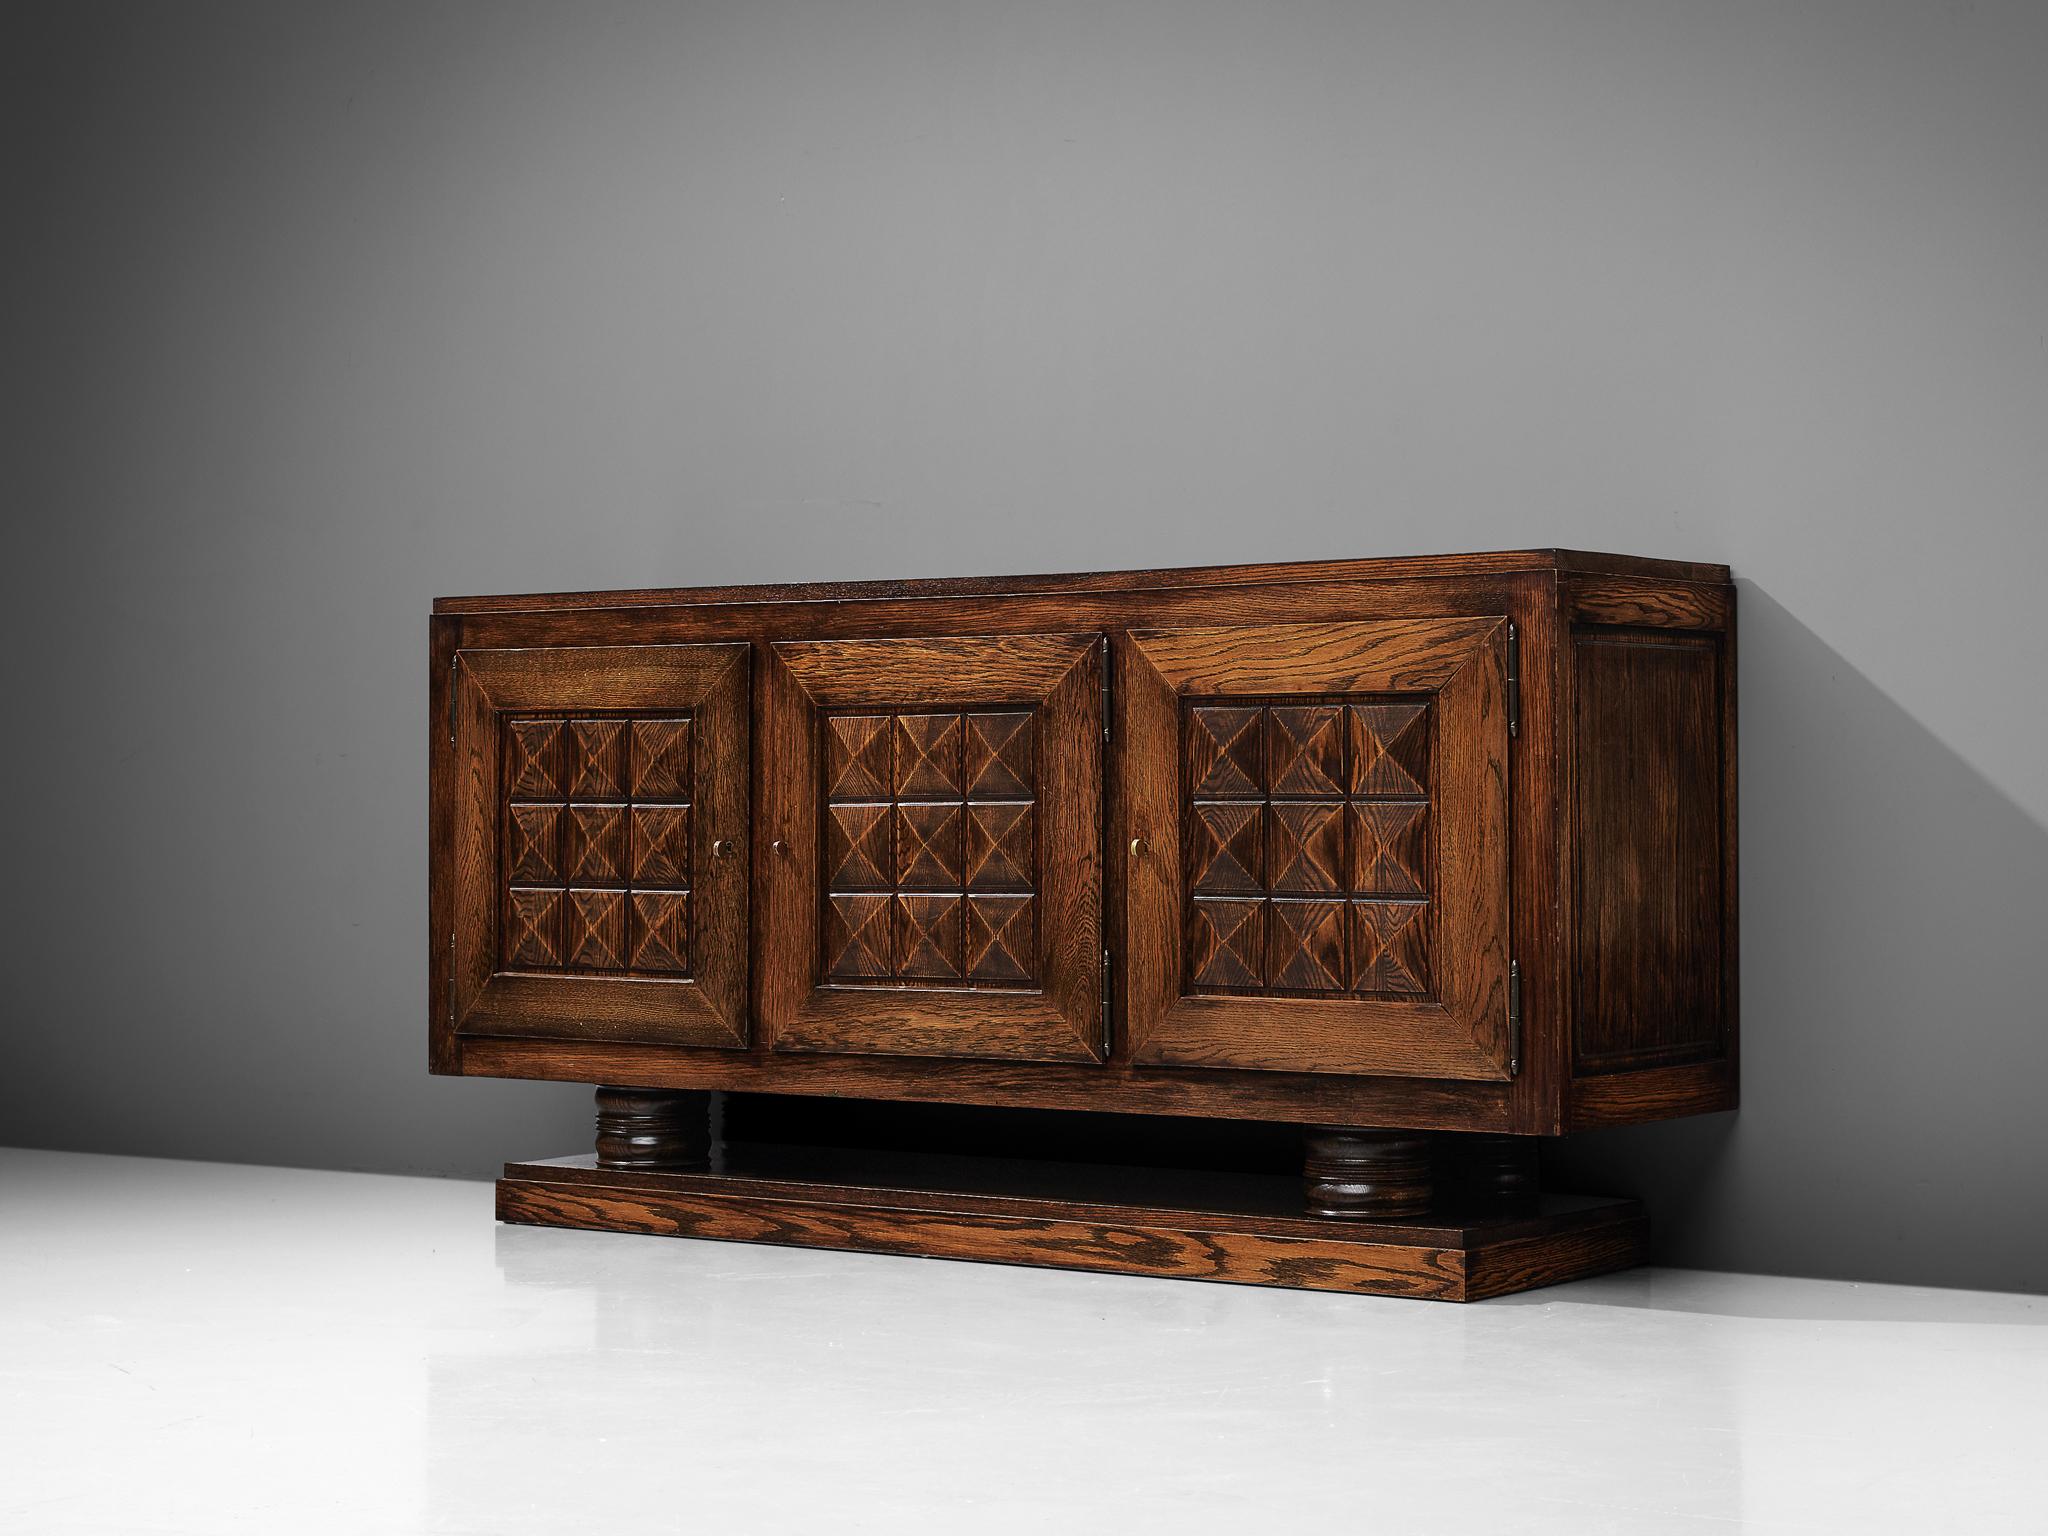 Gaston Poisson, credenza, stained oak, France, 1930s.

Sturdy sideboard in oak with graphical door panels. The sideboard is equipped with several shelves and one drawer which provide plenty of storage space. The door panels and base details show the